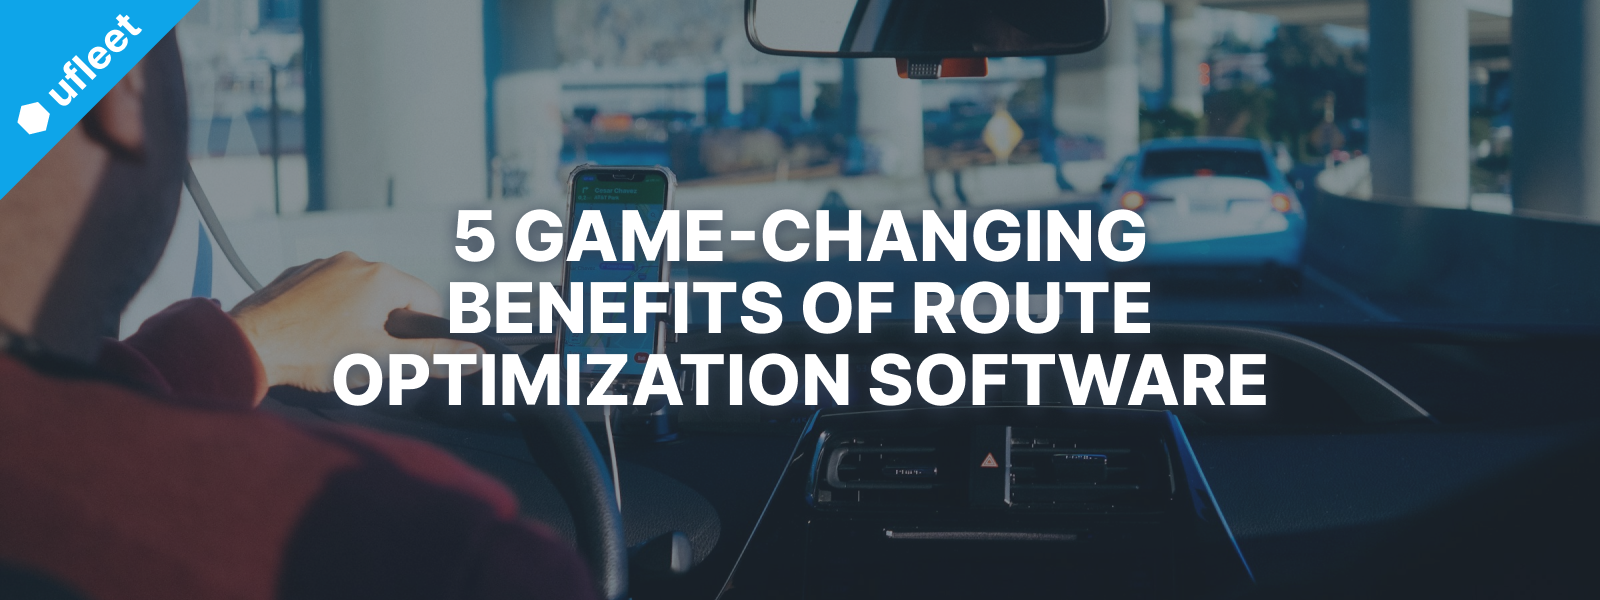 benefits of route optimization software